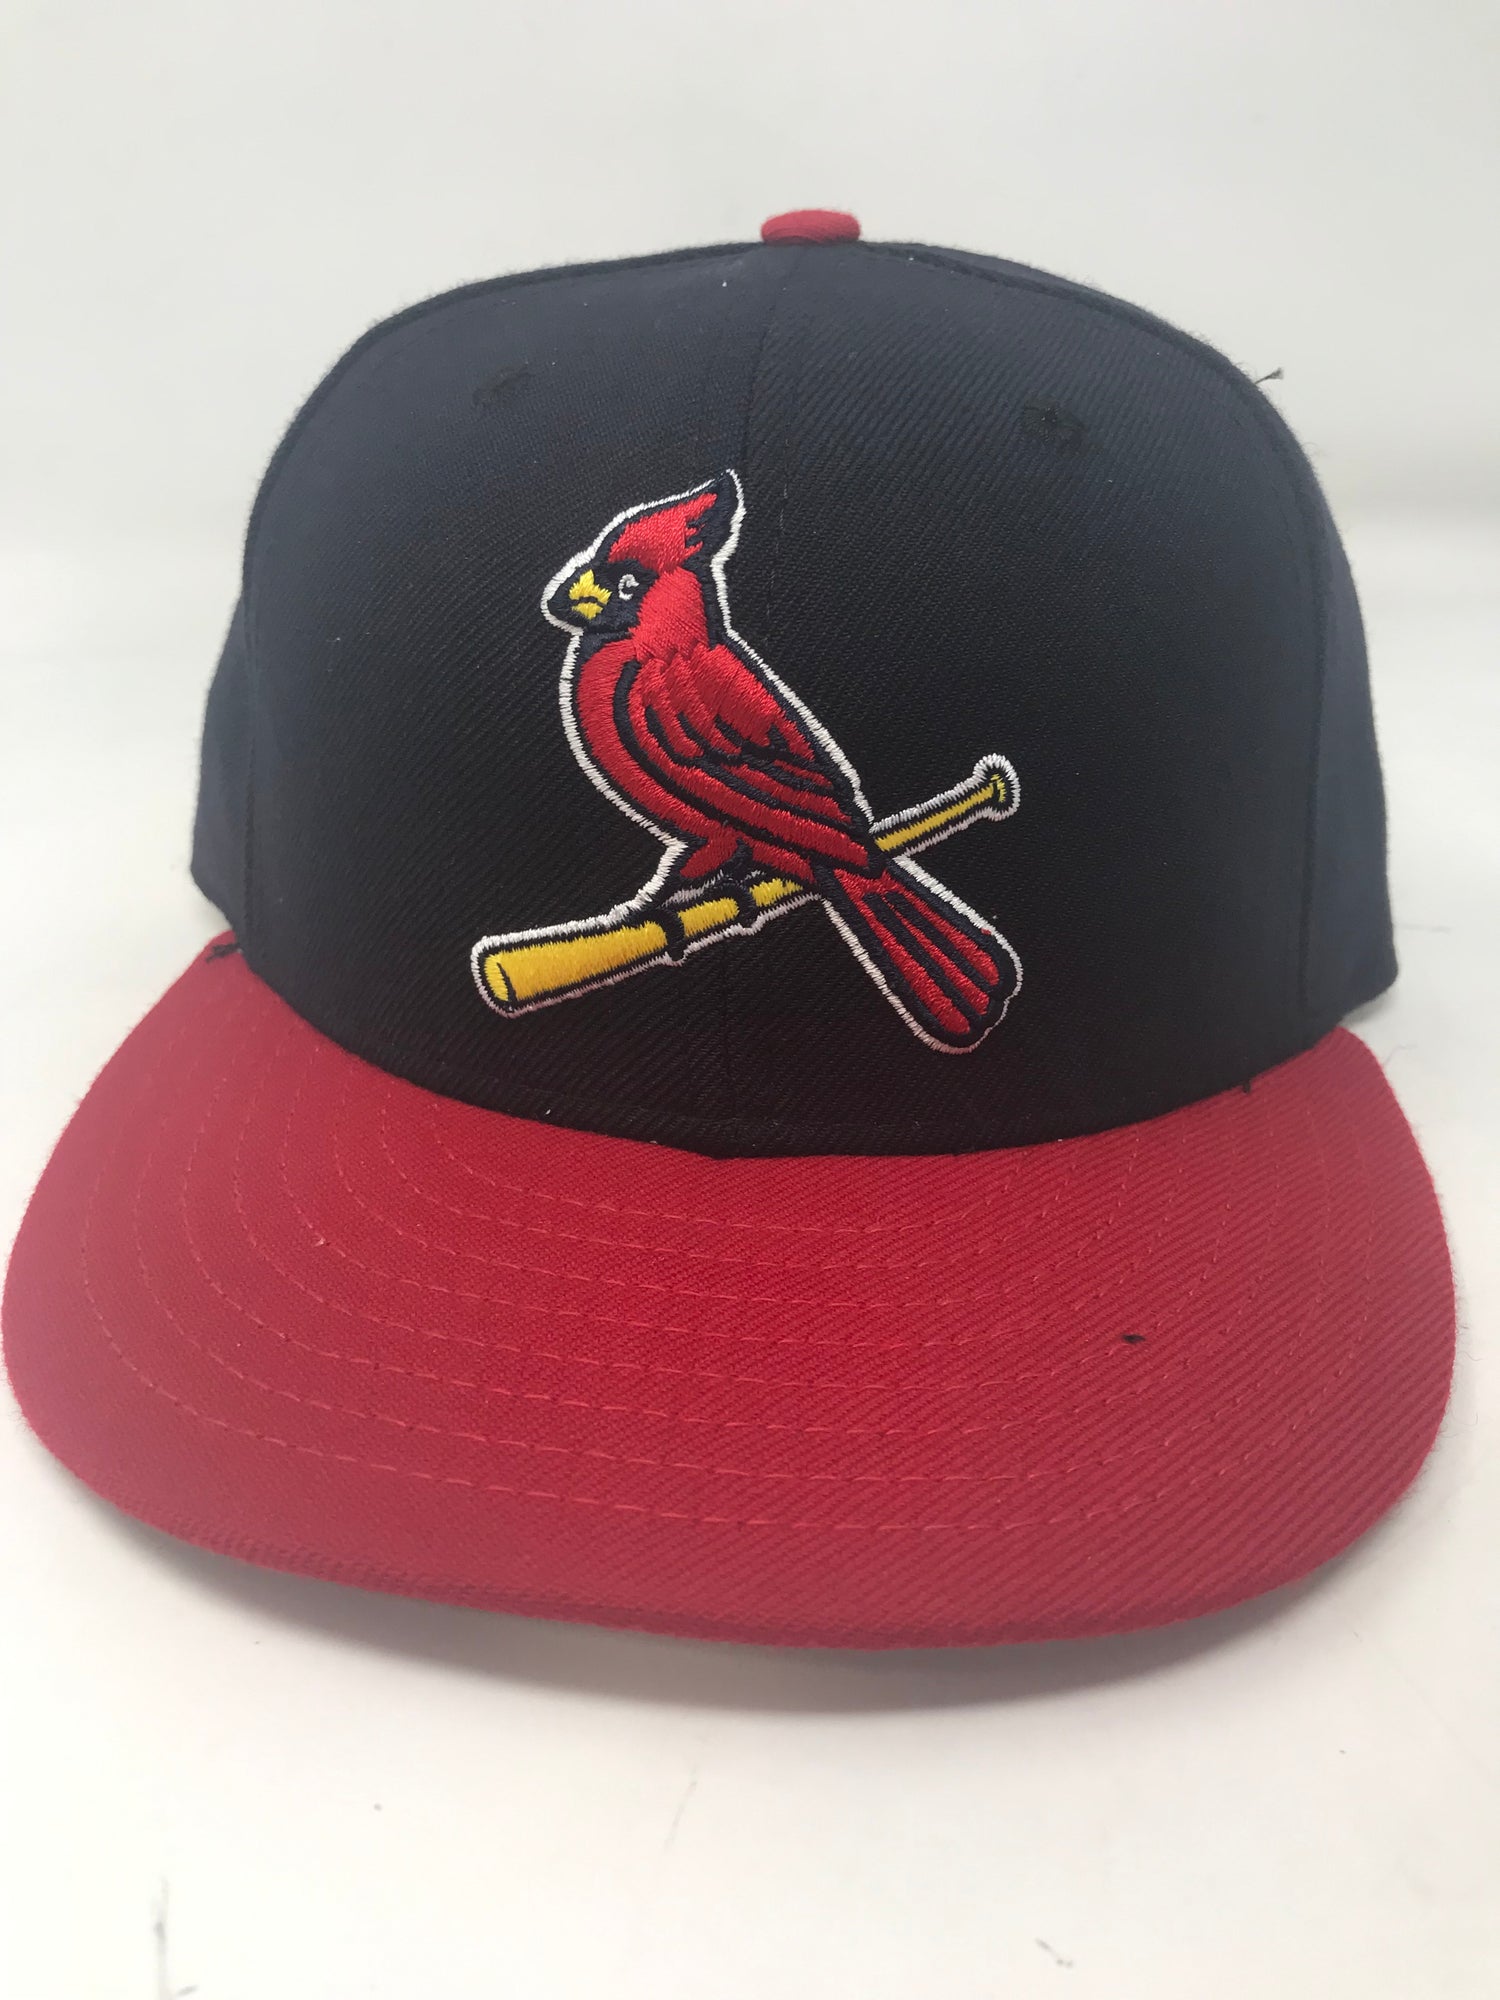 New Era St. Louis Cardinals Vintage Fitted Hat